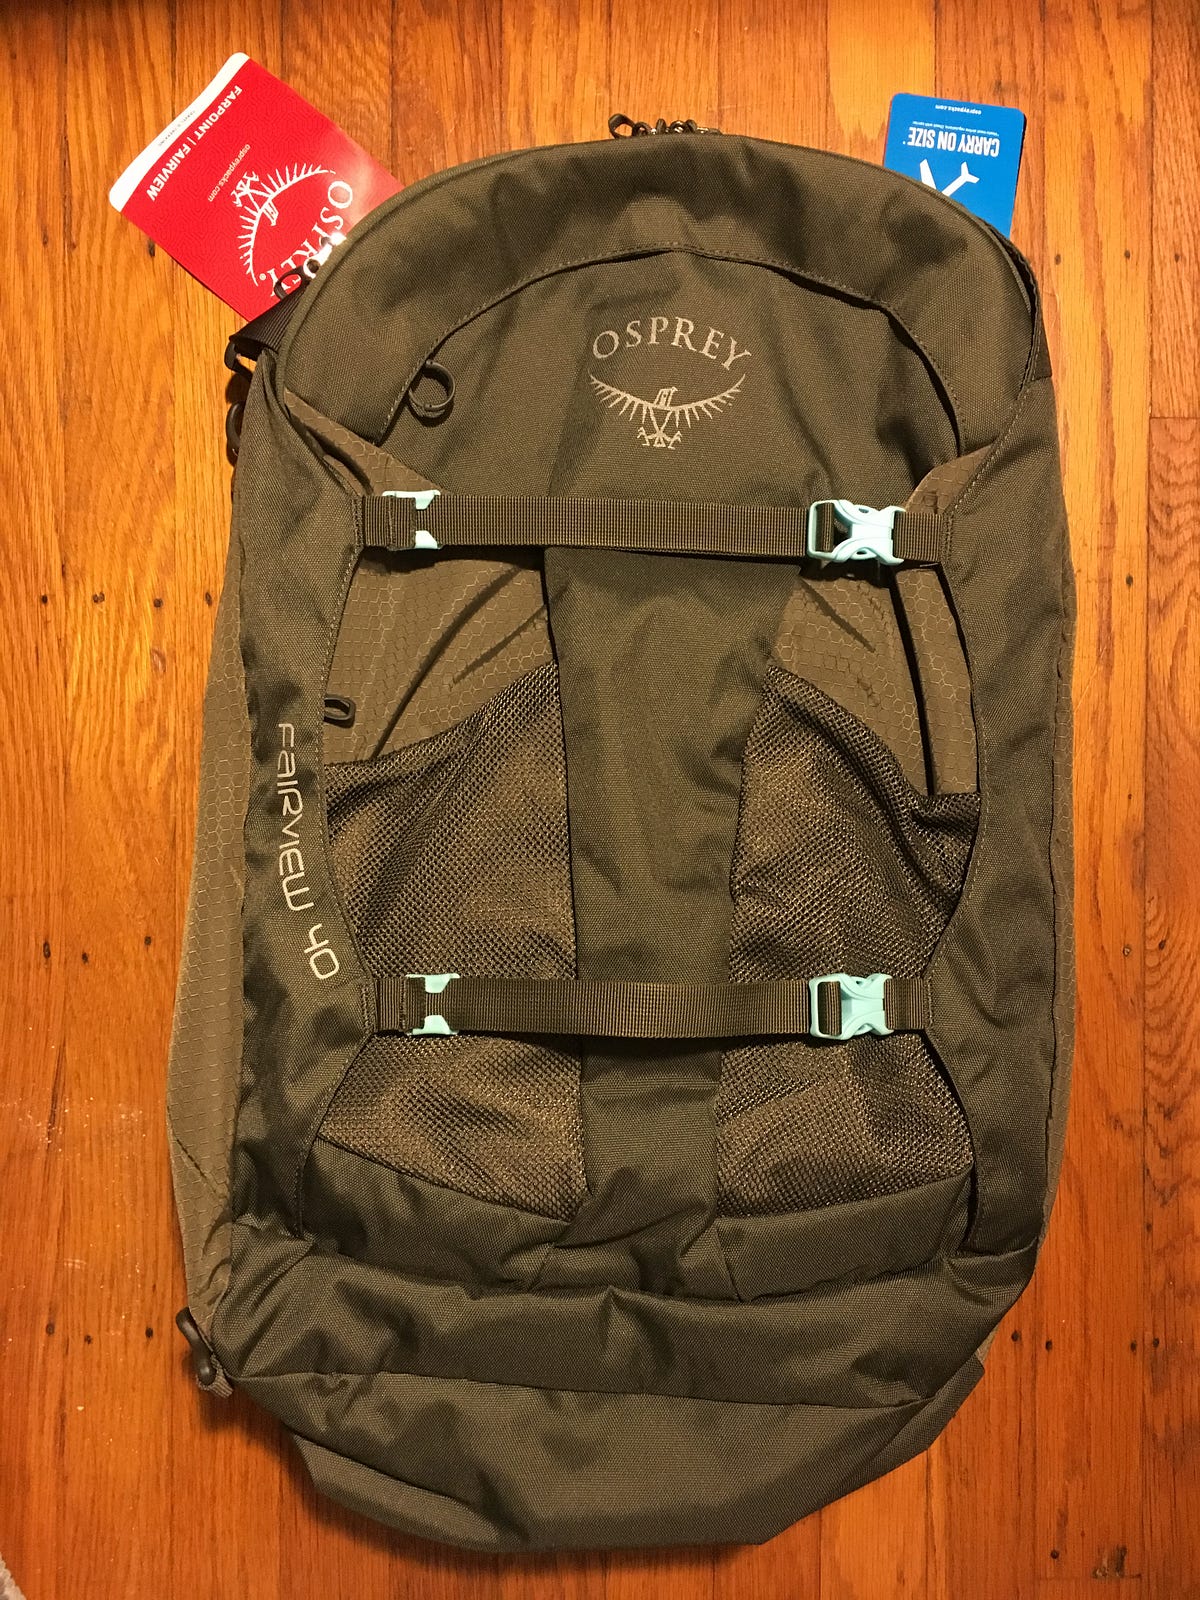 dienen Parasiet diepte Osprey Fairview 40 Review. I need a bag that allows me flexibility… | by  Steely | Medium